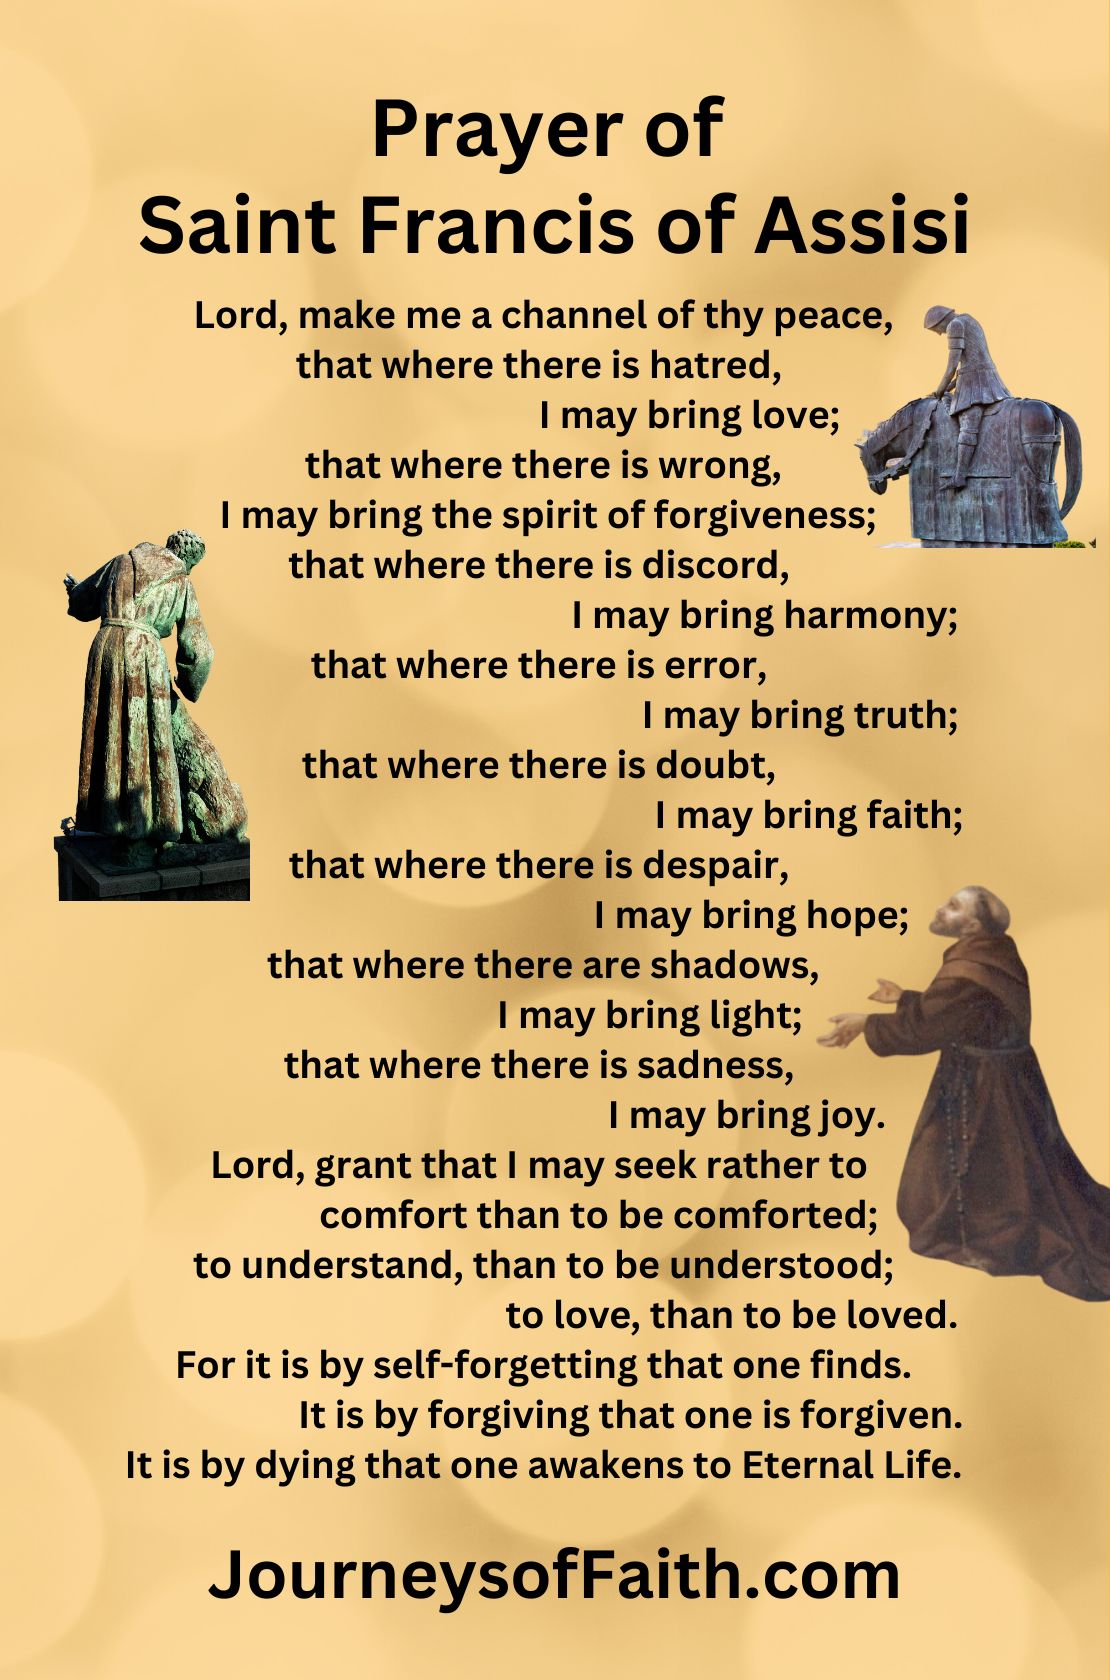 Prayer of Saint Francis of Assisi Prayer Card Packages - Bob and Penny Lord